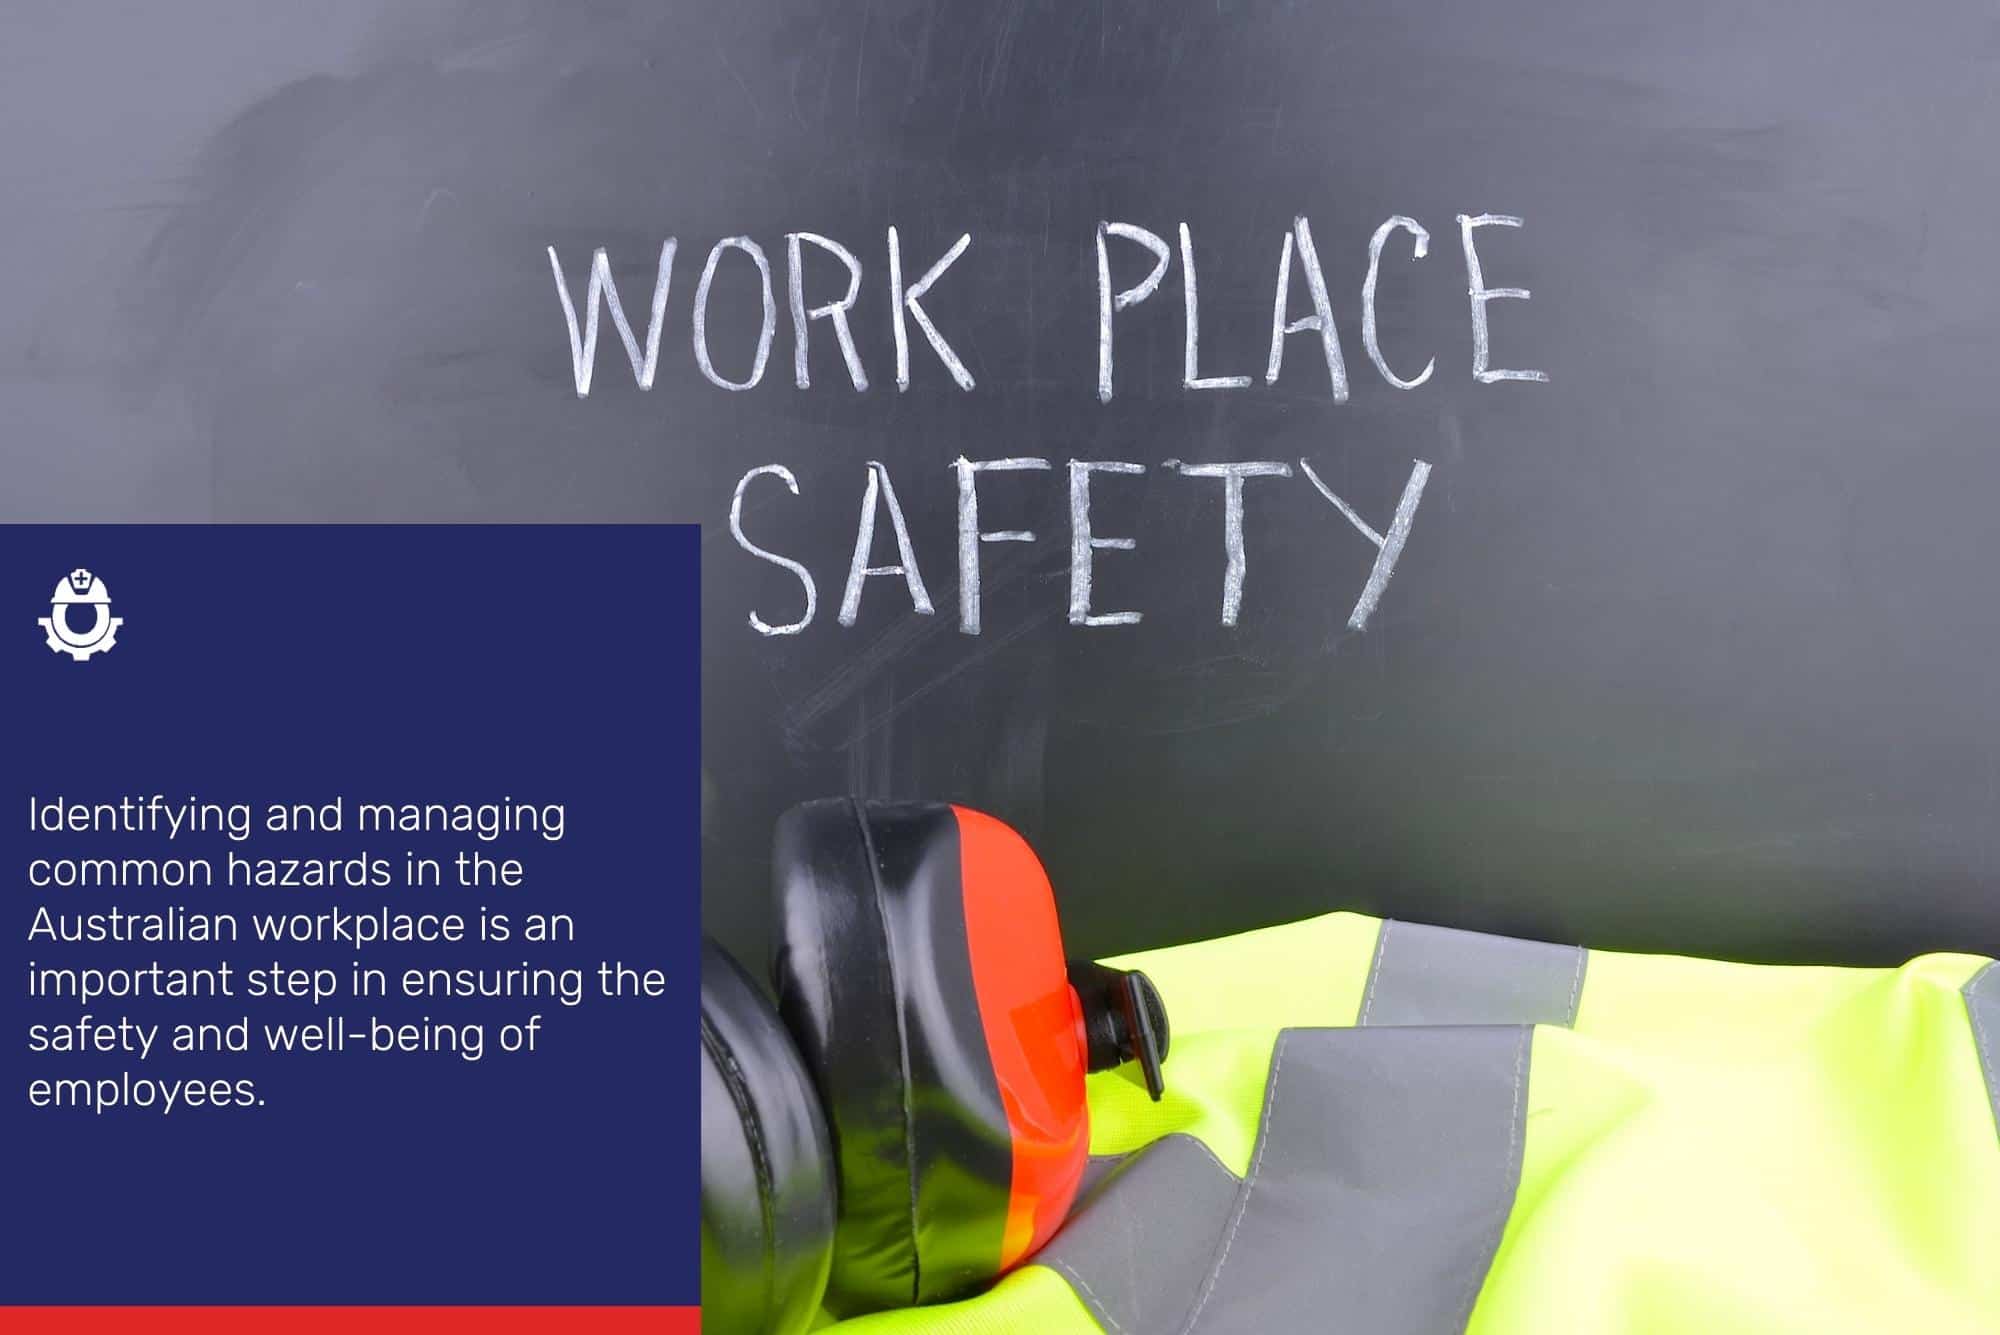 Identifying and managing common hazards in the Australian workplace